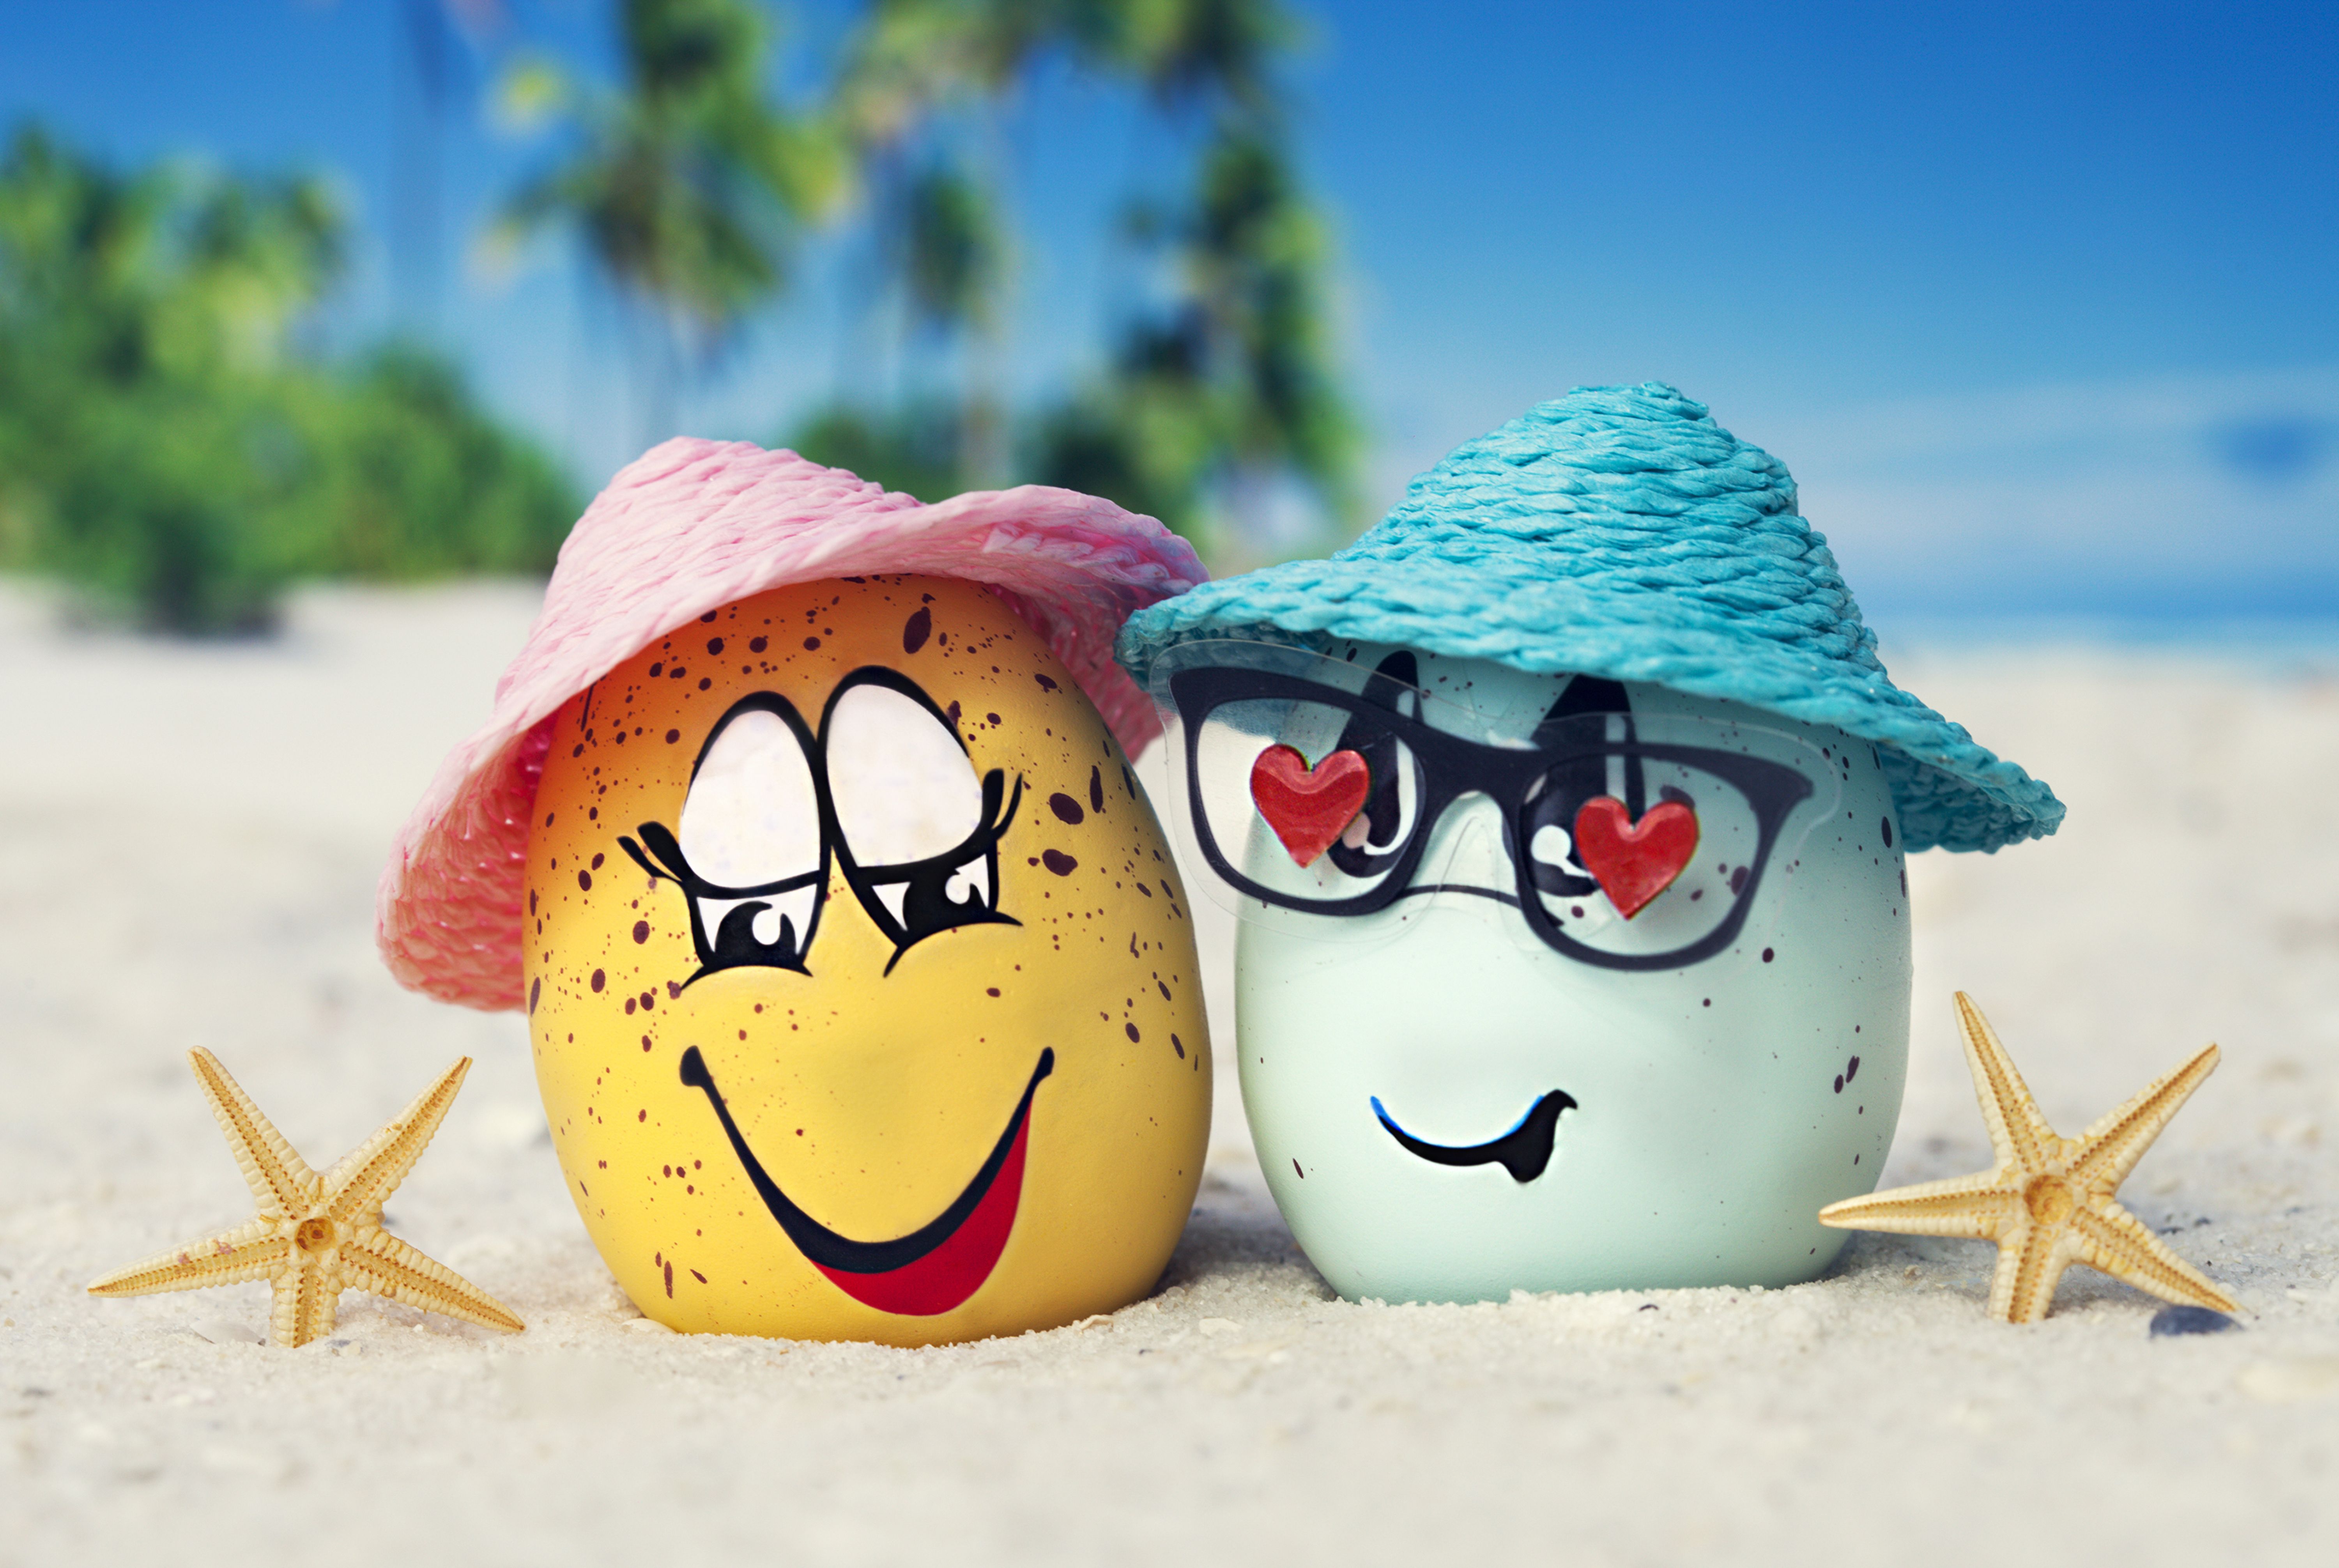 Two eggs in hats on the sand with starfish in summer wallpaper and image, picture, photo